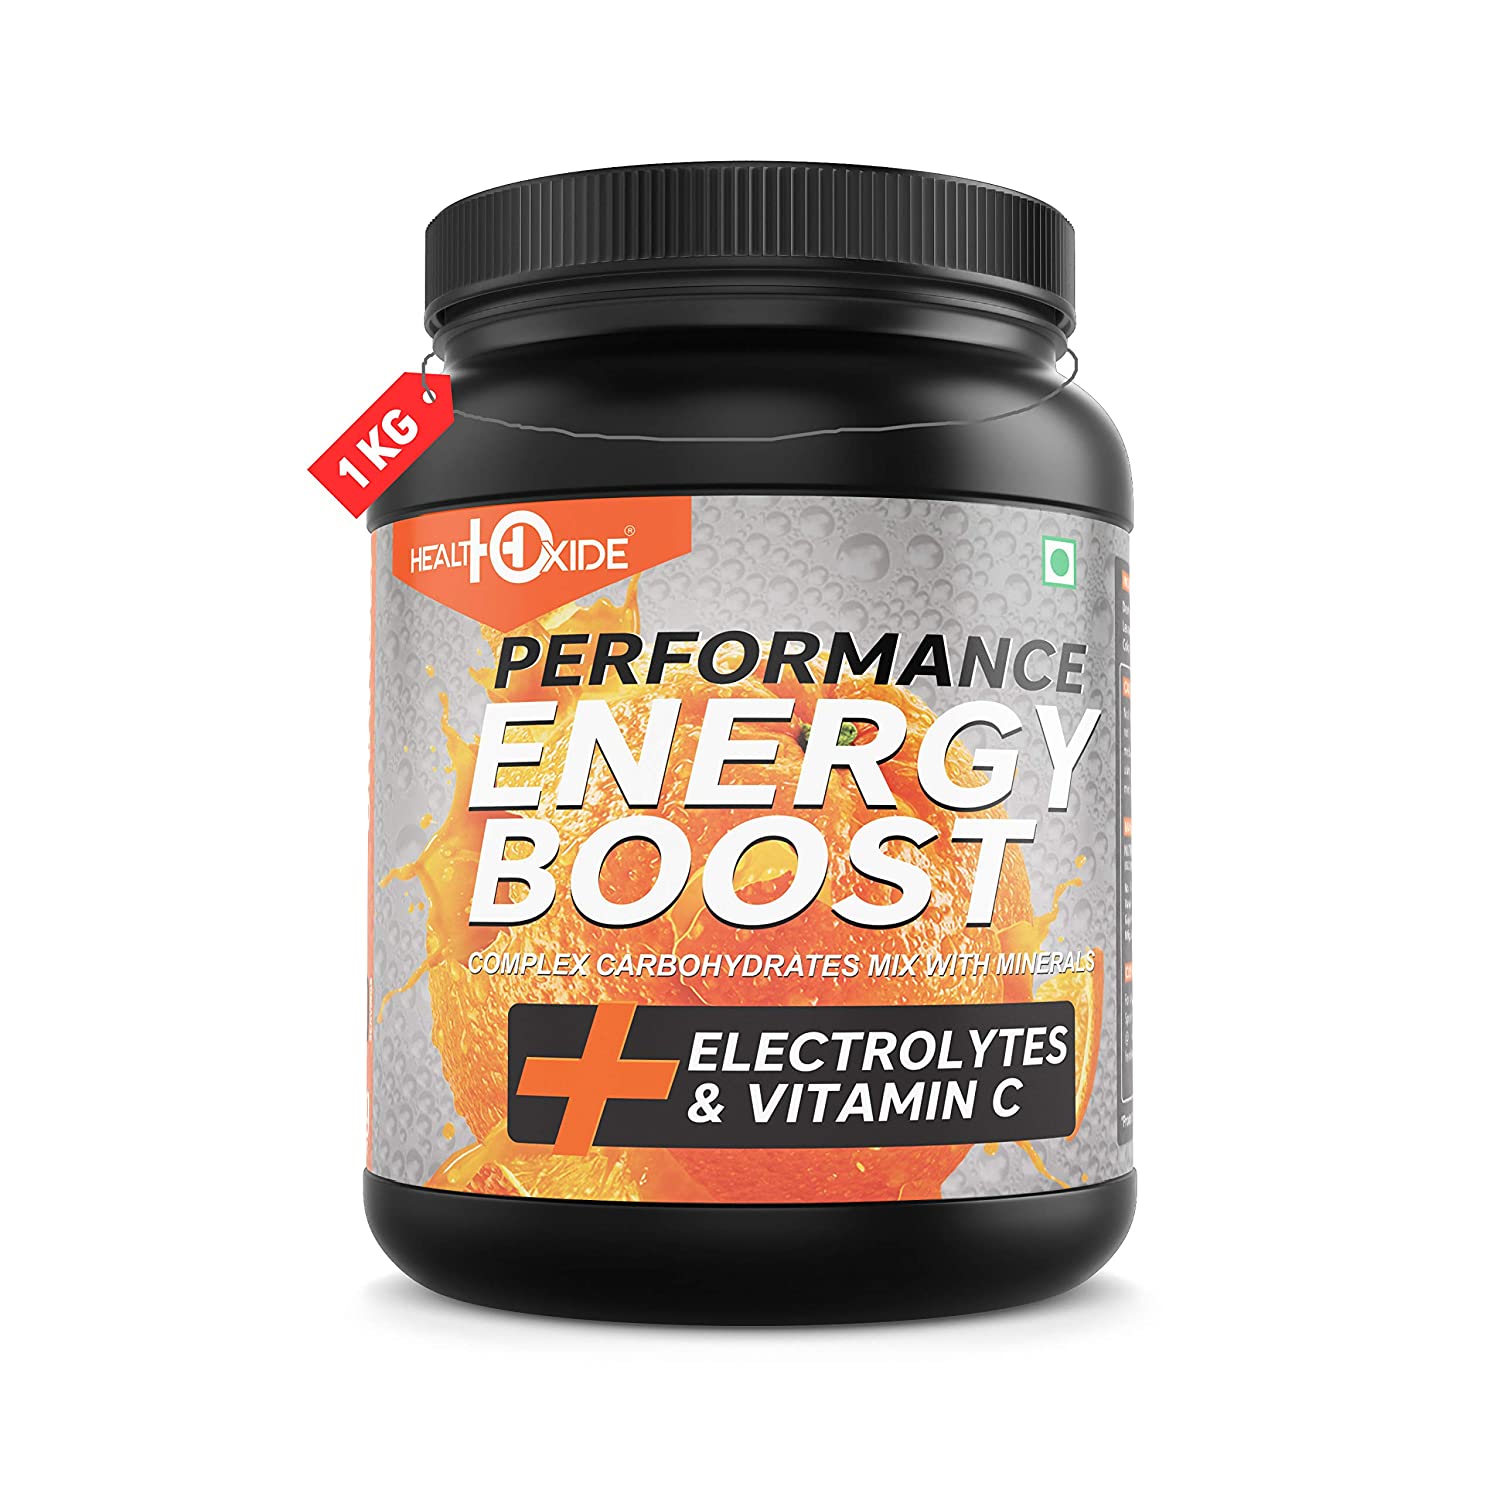 Nutricore's ENERGY BOOST Extra Power 